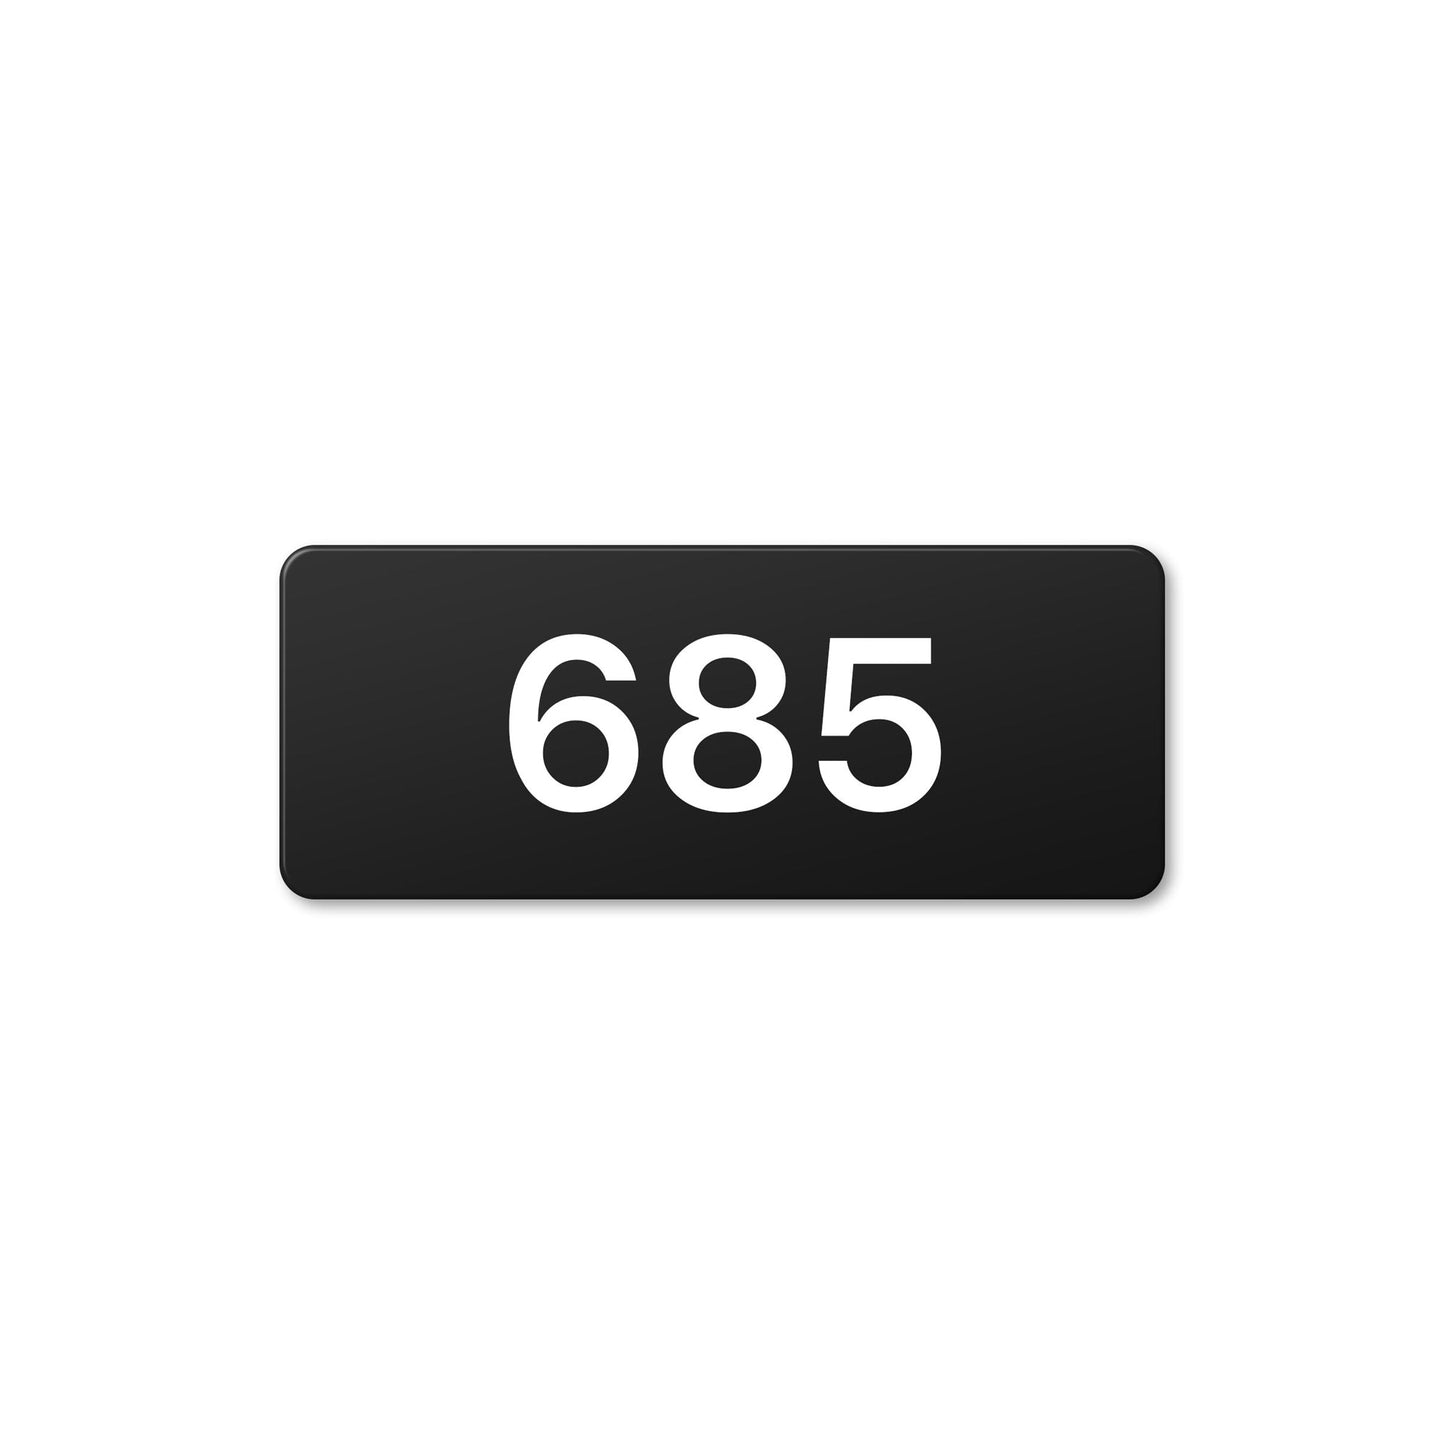 Numeral 685